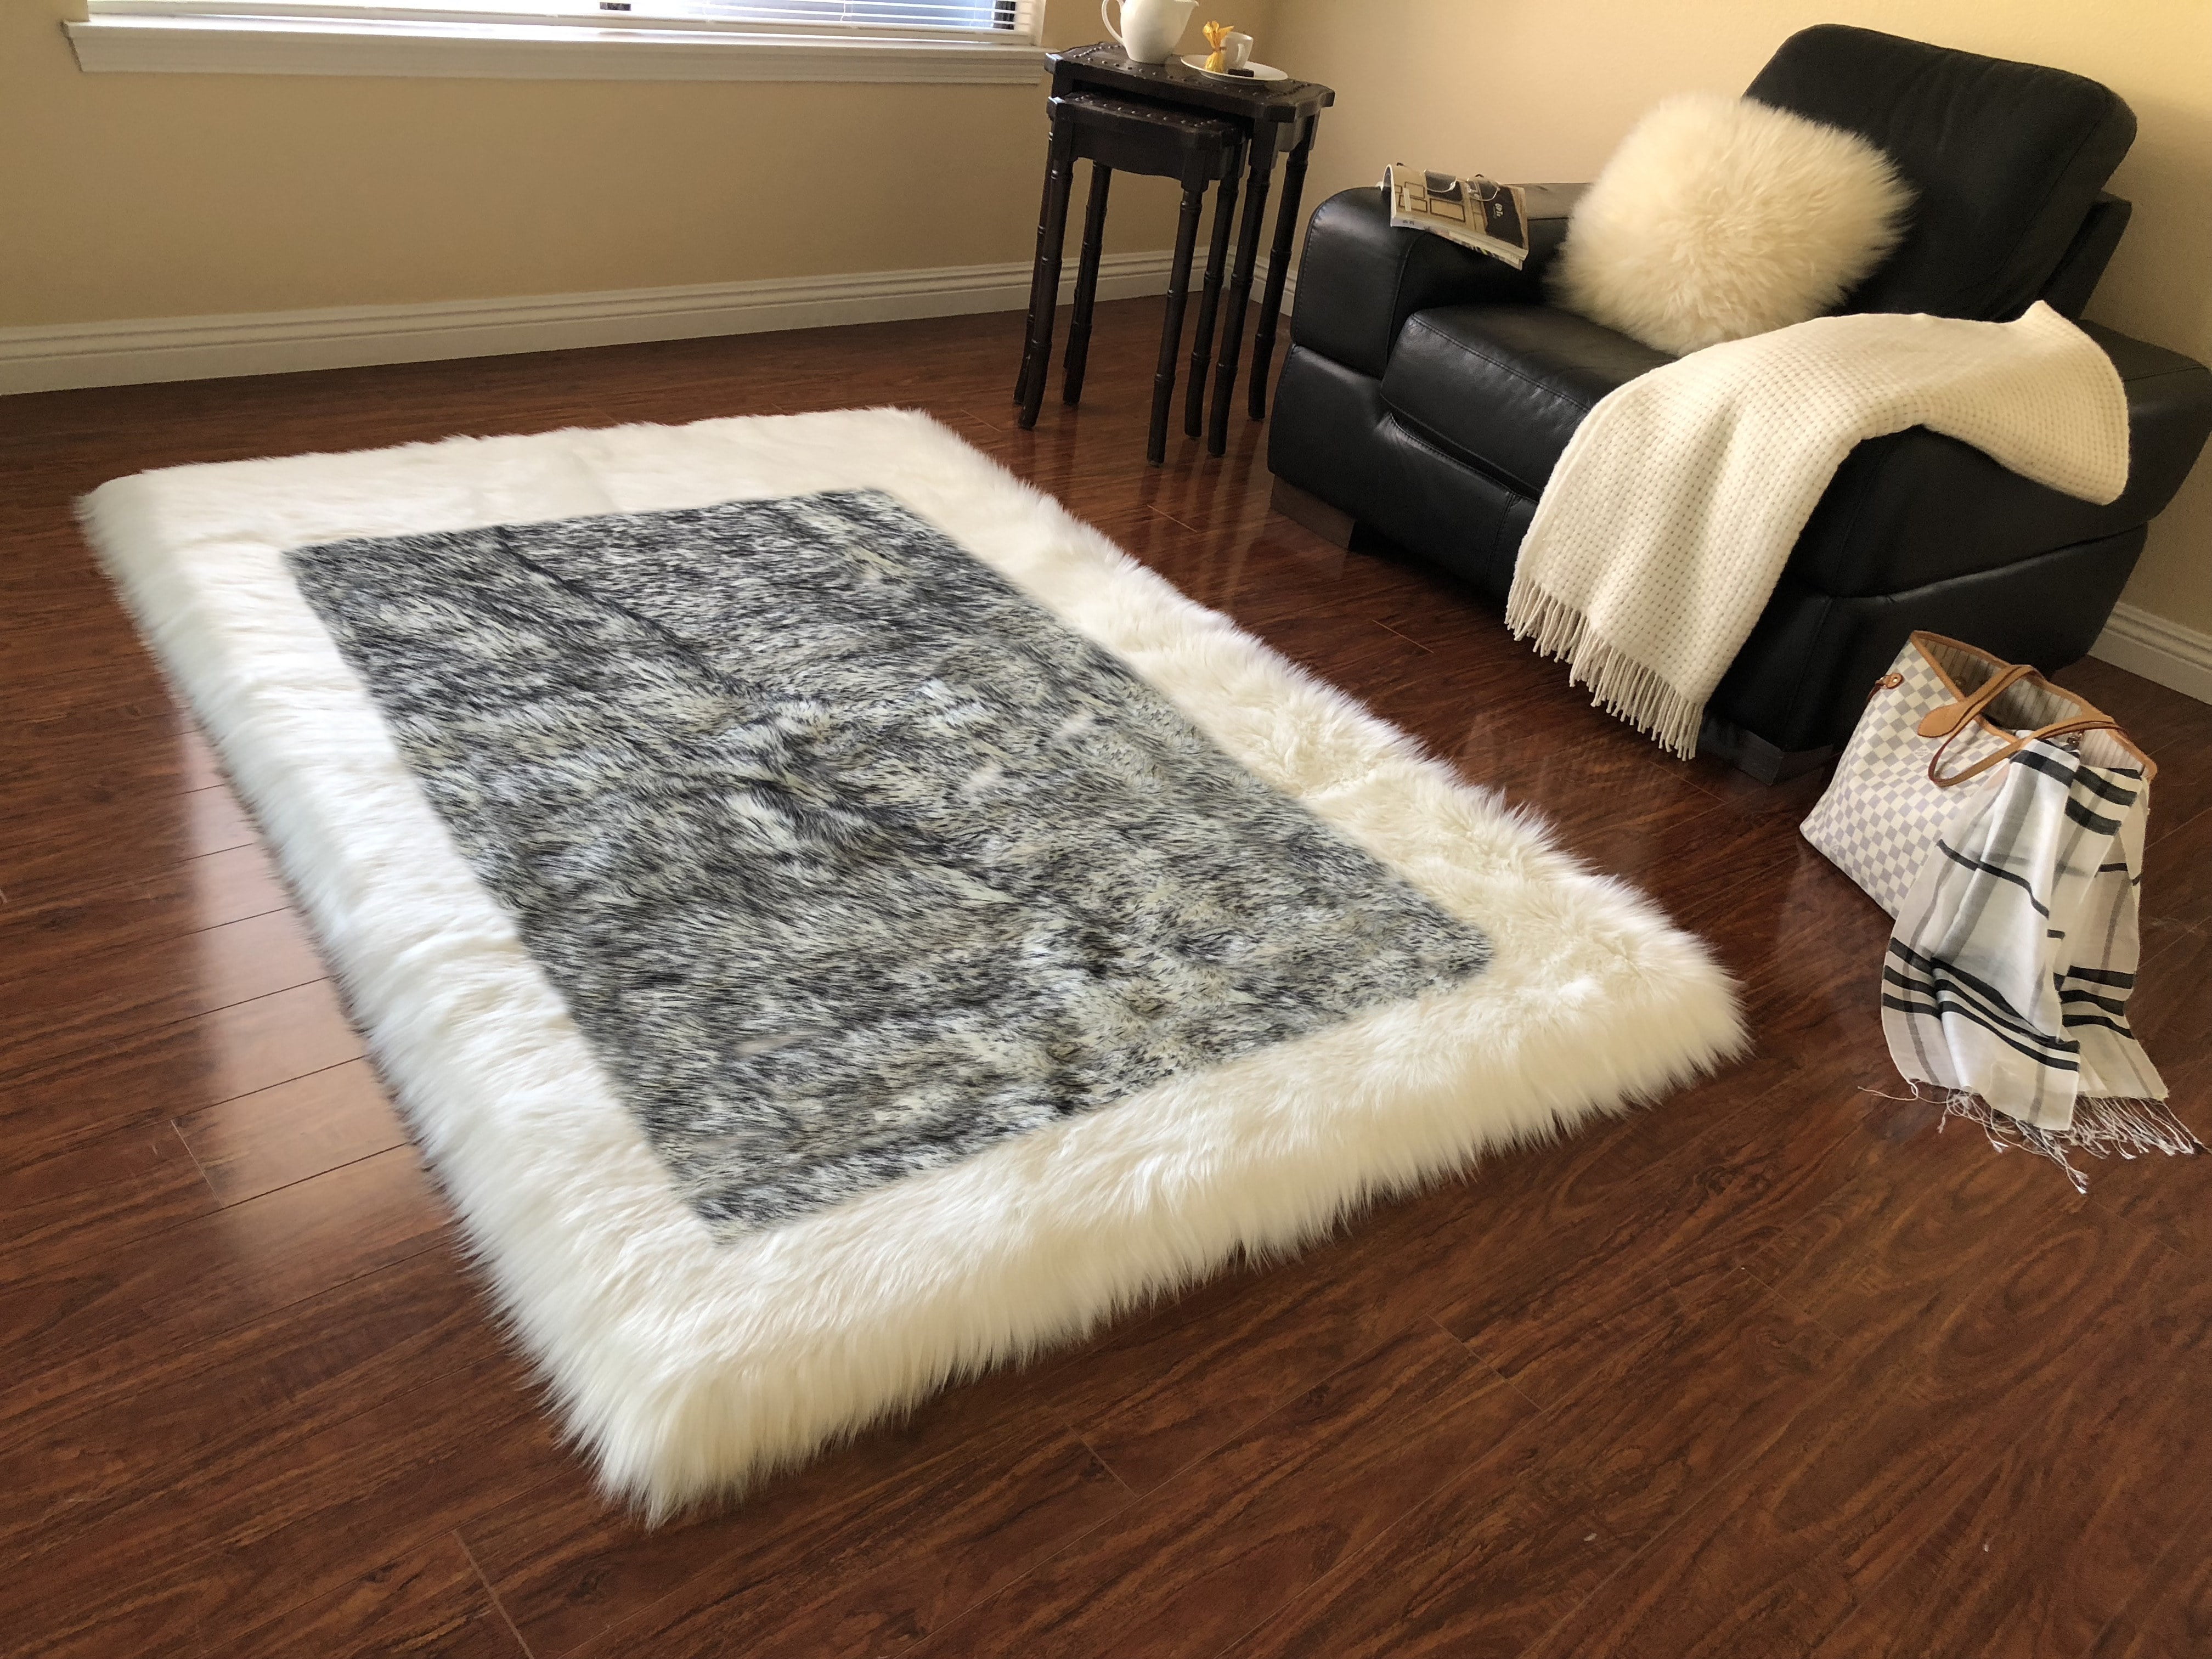 Details about  /  Original Faux-Chinchilla Area Rug Super Soft and Cozy Hi 2x3 Feet